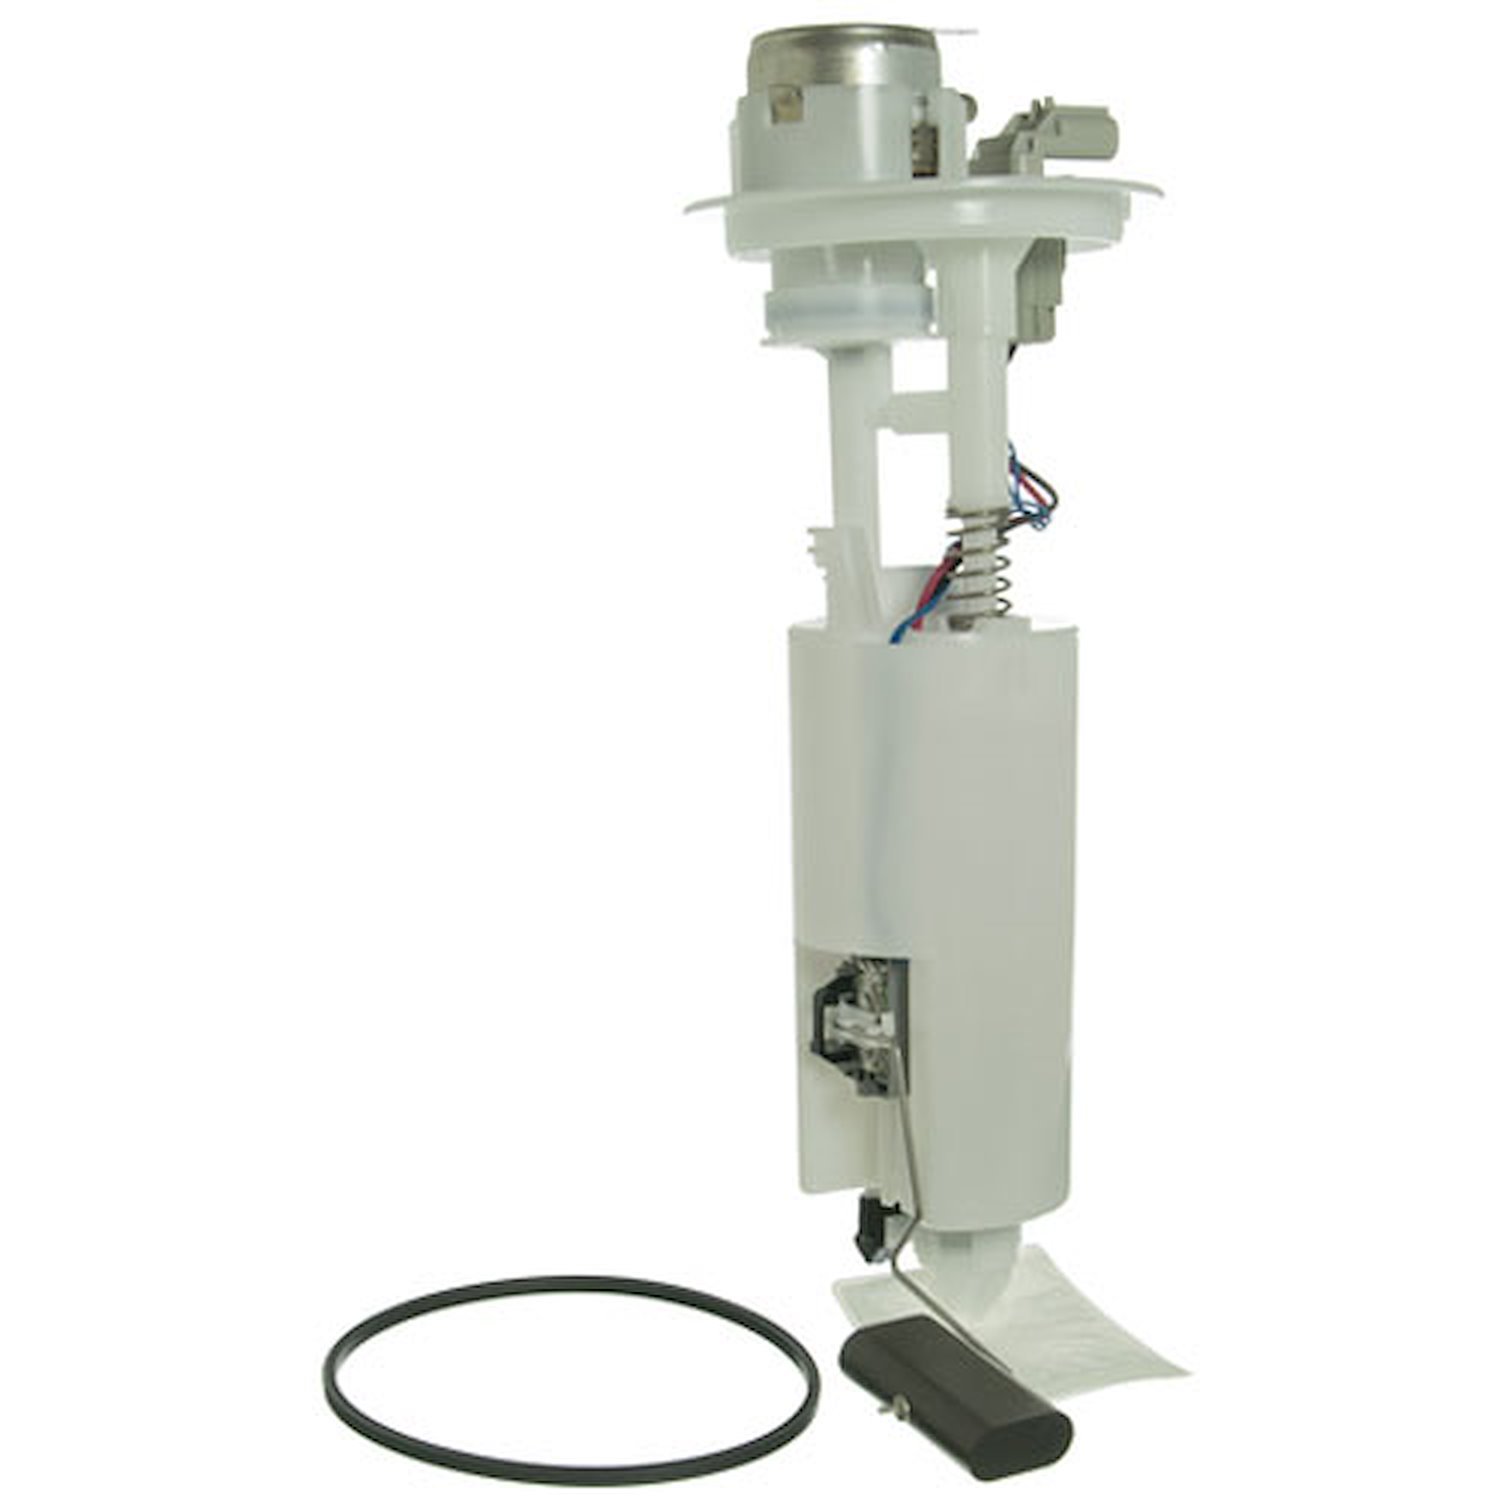 OE Chrysler/Dodge Replacement Electric Fuel Pump Module Assembly 2001-02 Chrysler Sebring 2.4L/2.7L 4 Cyl